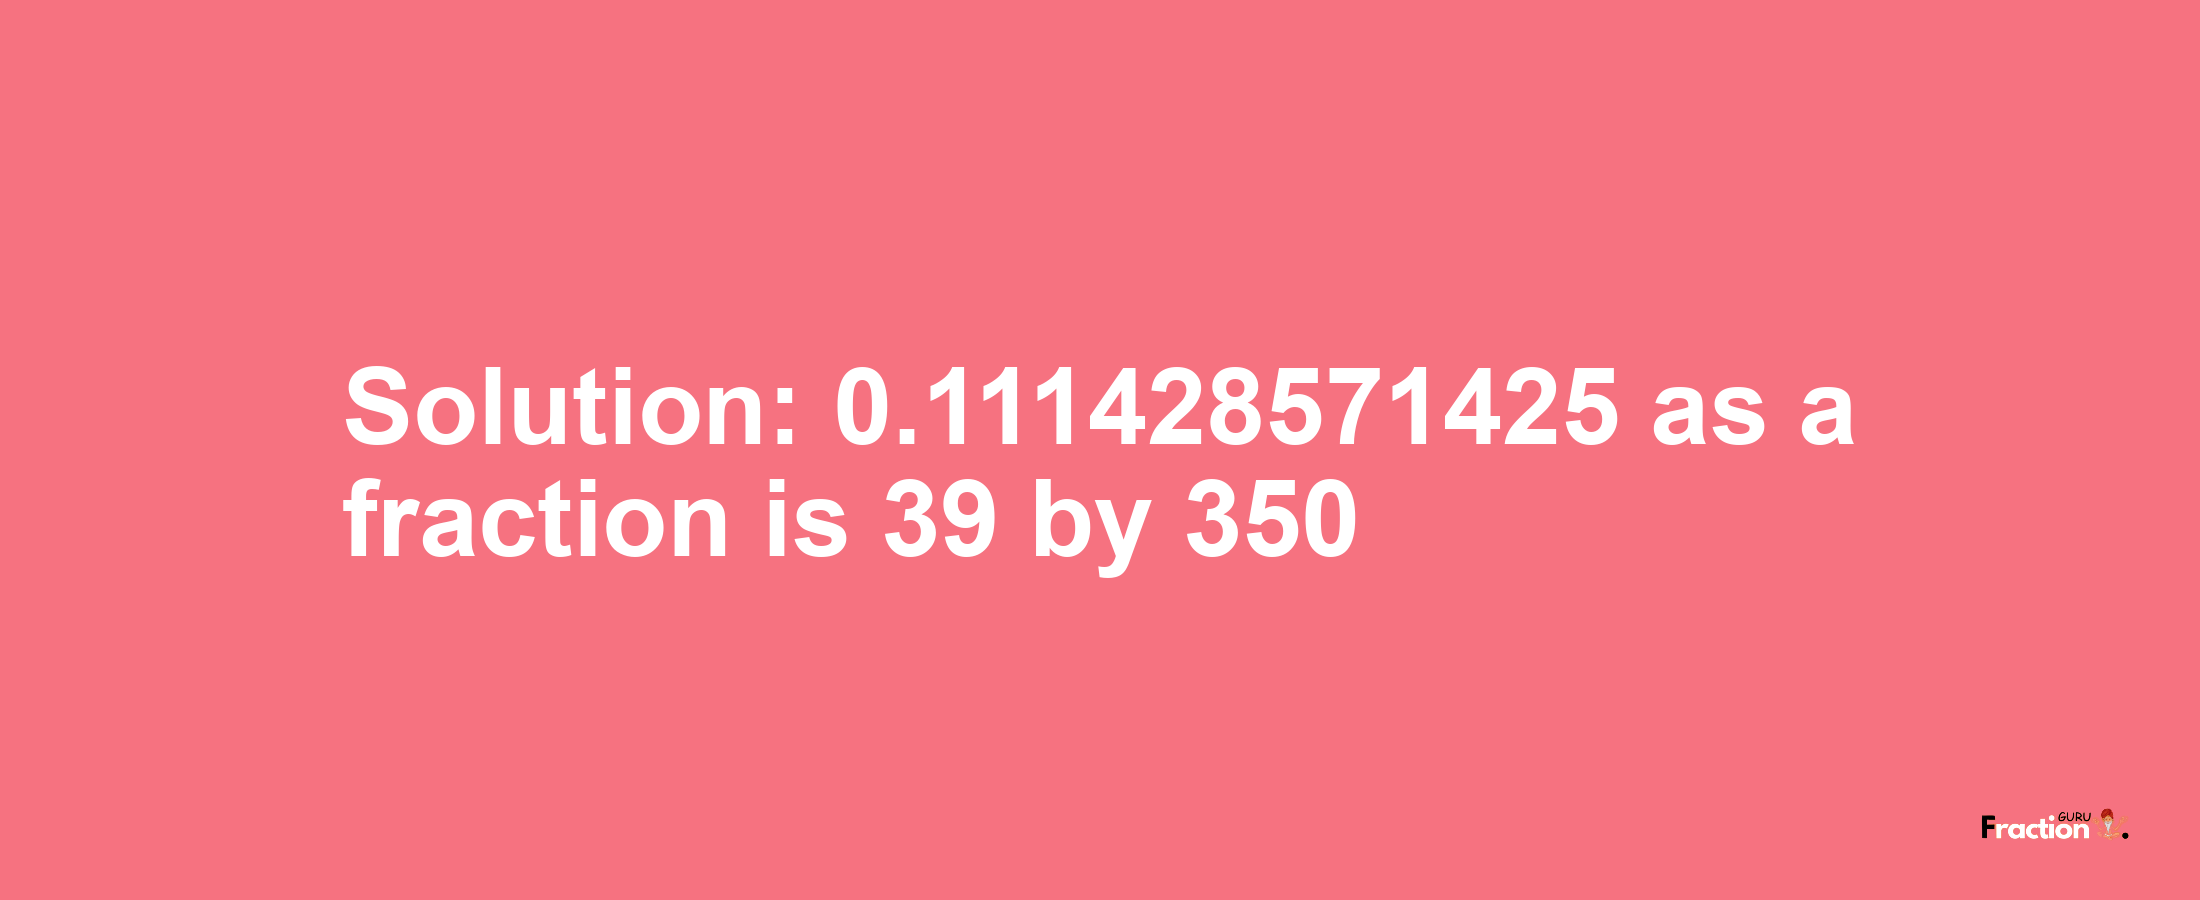 Solution:0.111428571425 as a fraction is 39/350